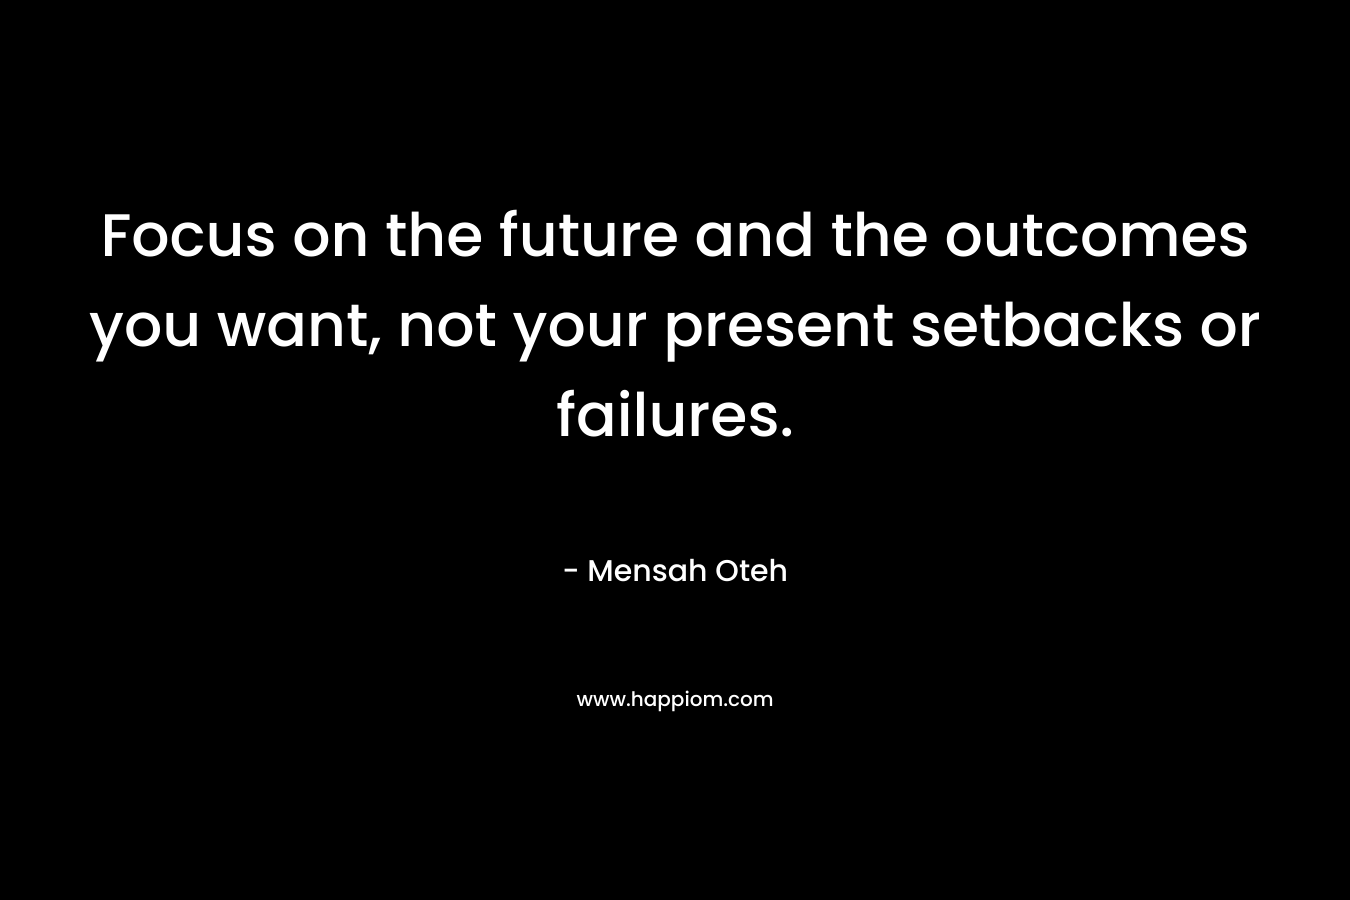 Focus on the future and the outcomes you want, not your present setbacks or failures.